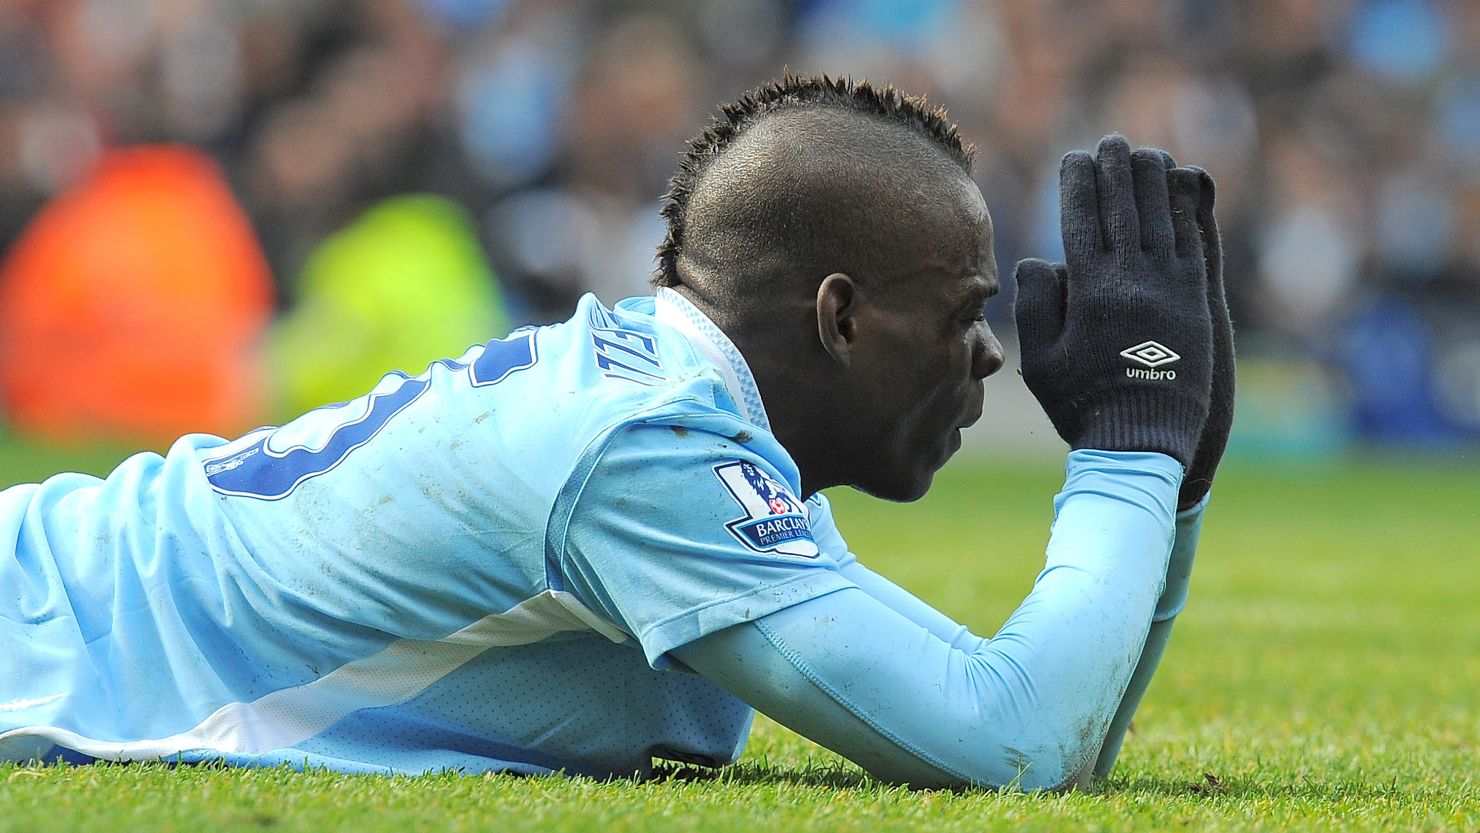 Mario Balotelli has had an eventful two years in English football under the leadership of Roberto Mancini at Manchester City